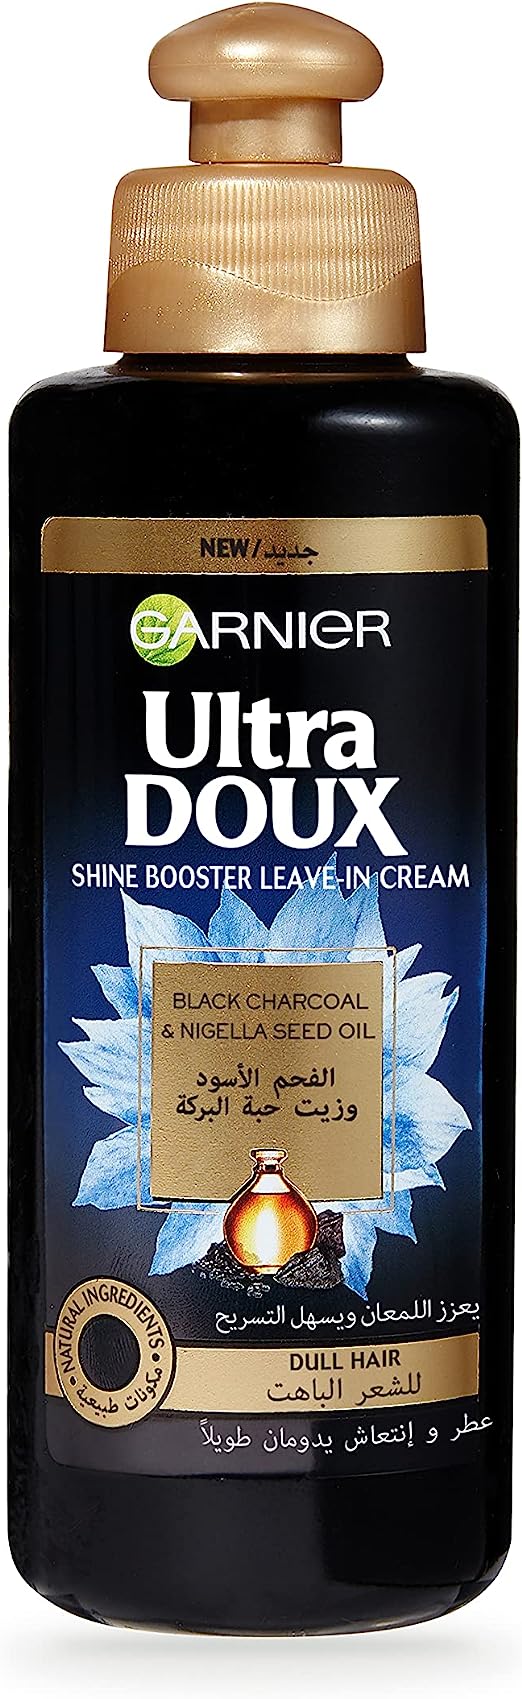 Garnier Ultra Doux Black Charcoal Leave In Conditioning Cream 200ml